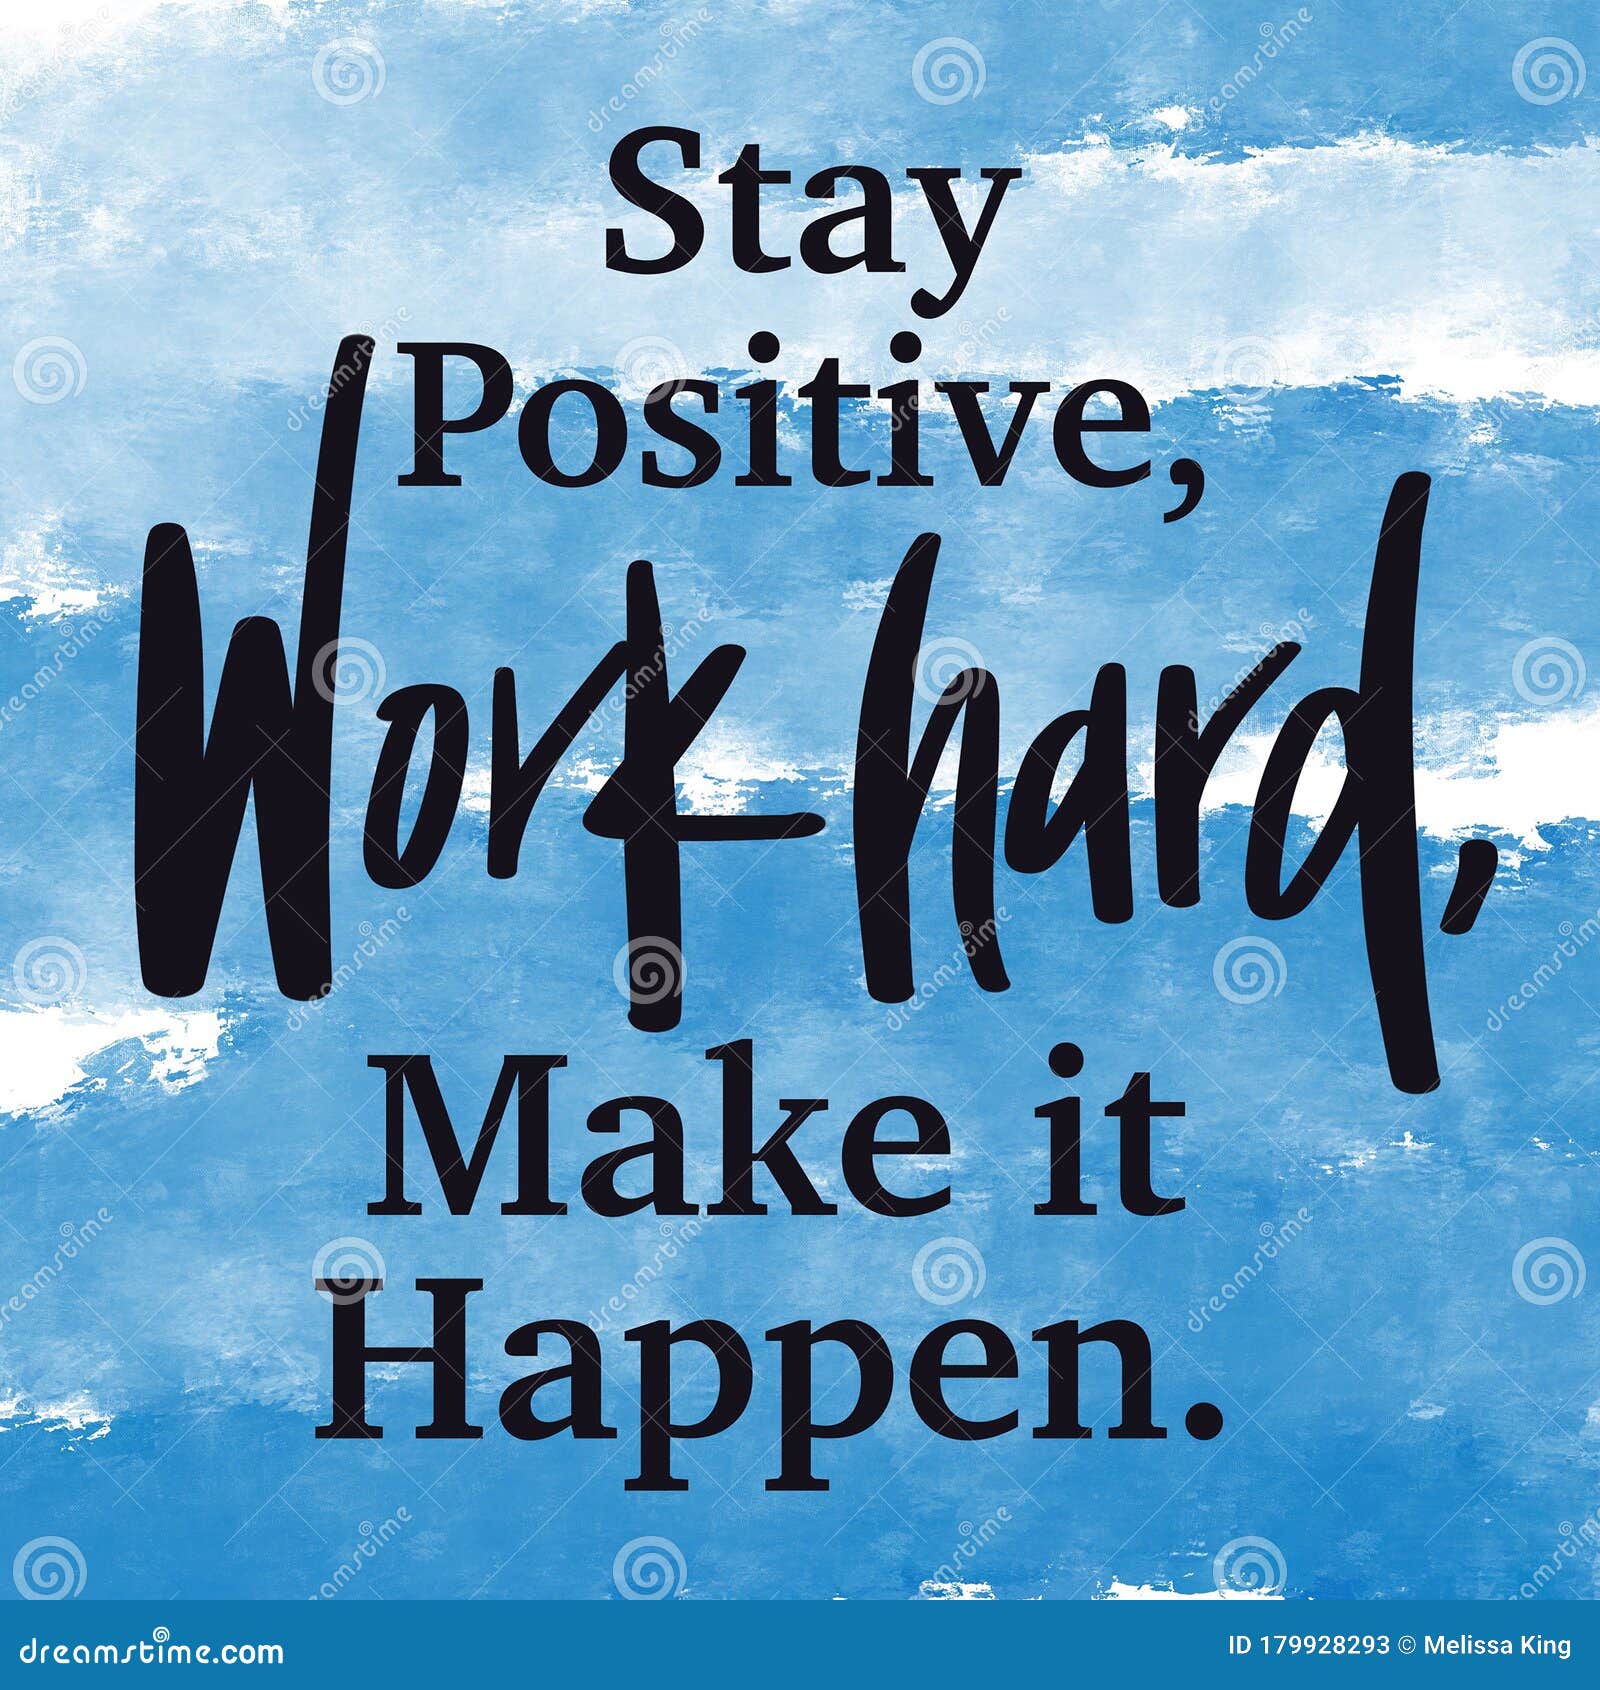 Quote on Blue Abstract Background - Stay Positive, Work Hard, Make it  Happen. Stock Image - Image of life, element: 179928293